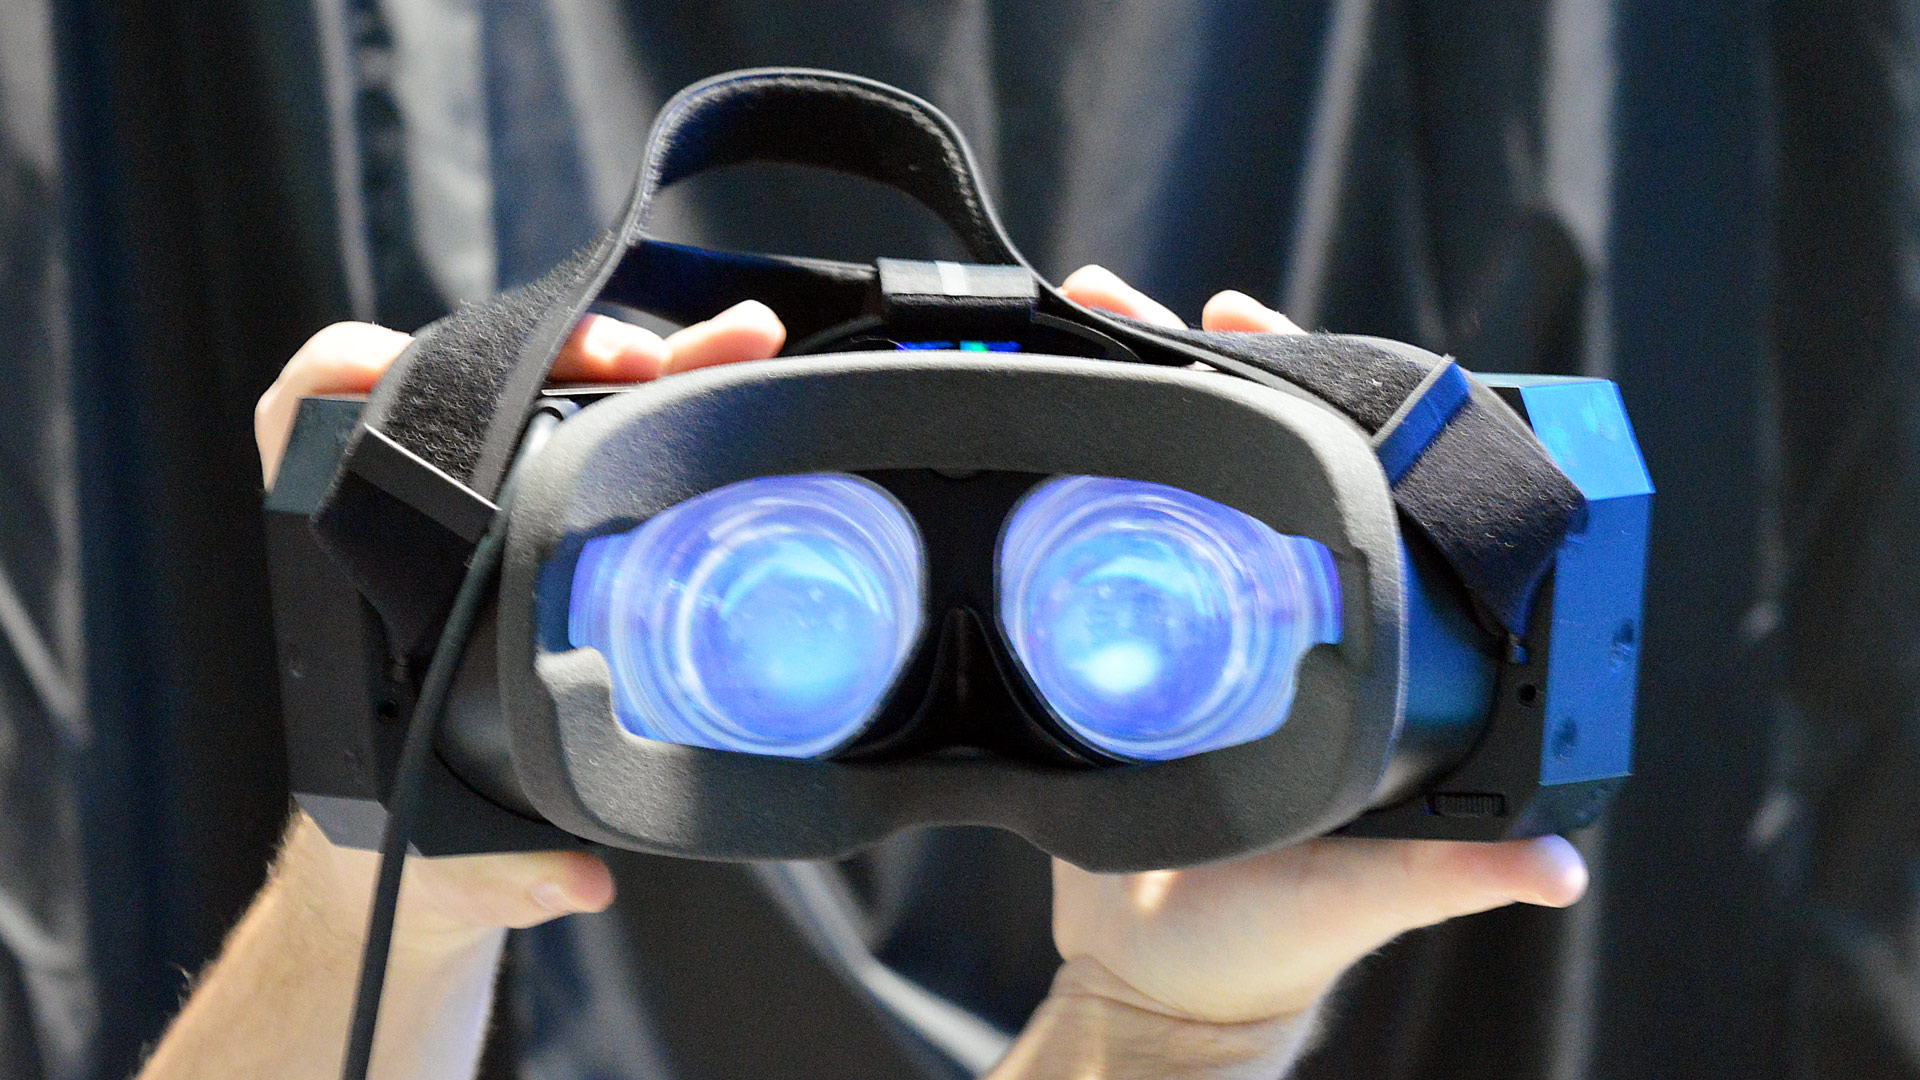 Pimax '8K' Sees Further Delays Due Lens Design, Pre-production Headset Pushed to May Release – VR